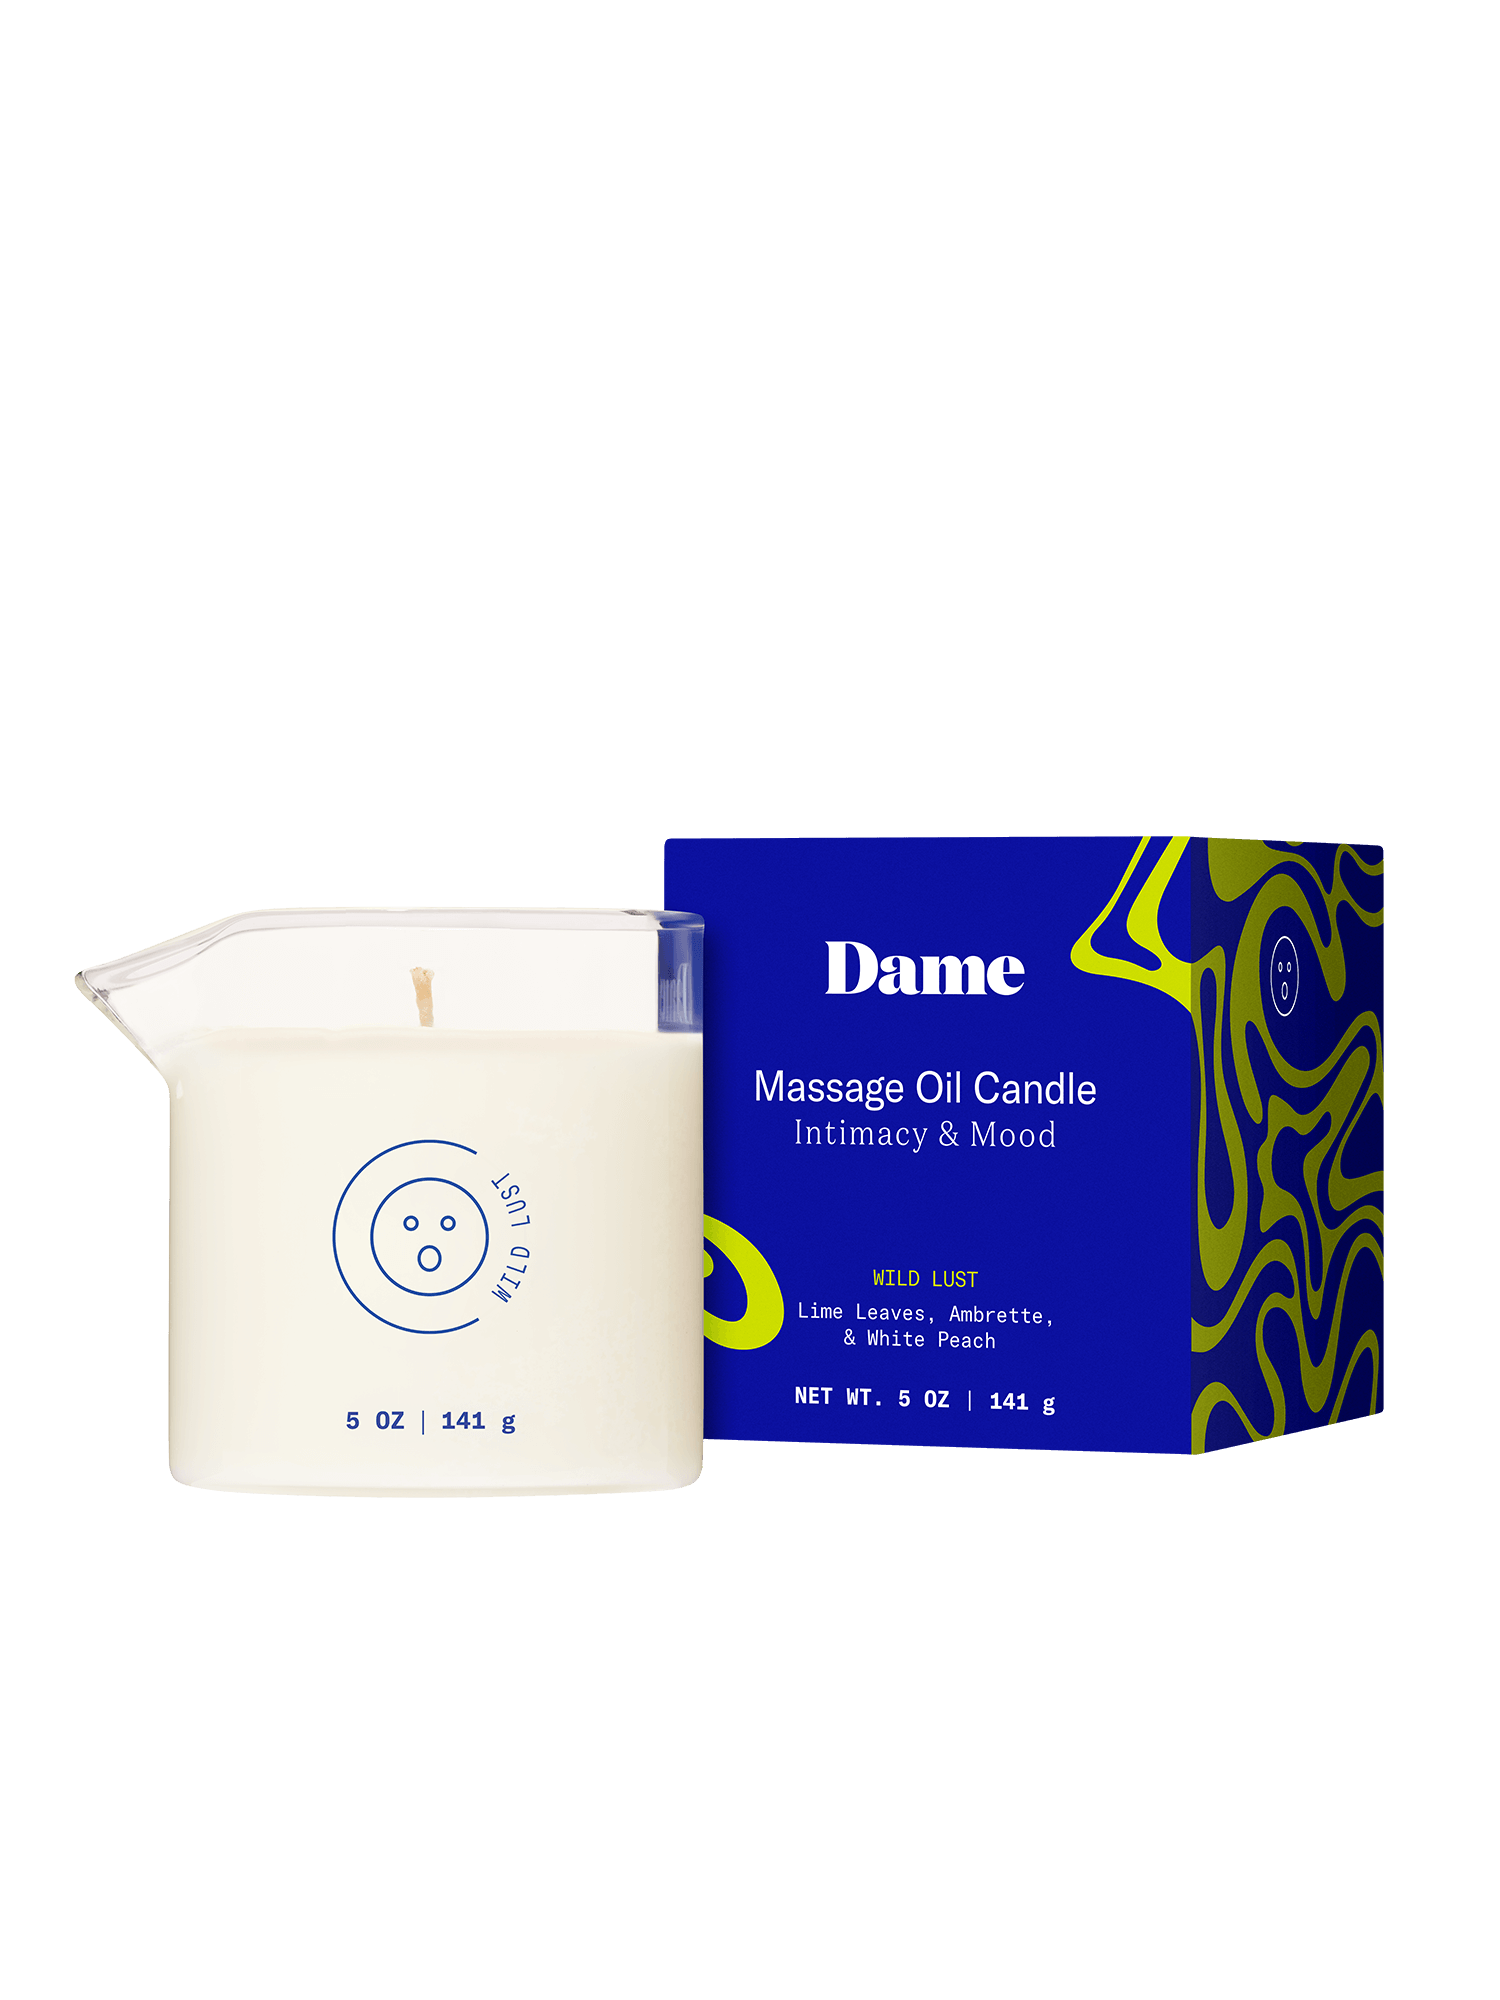 Wild Lust | Dame Massage Oil Candle out of the box next to its blue packaging box